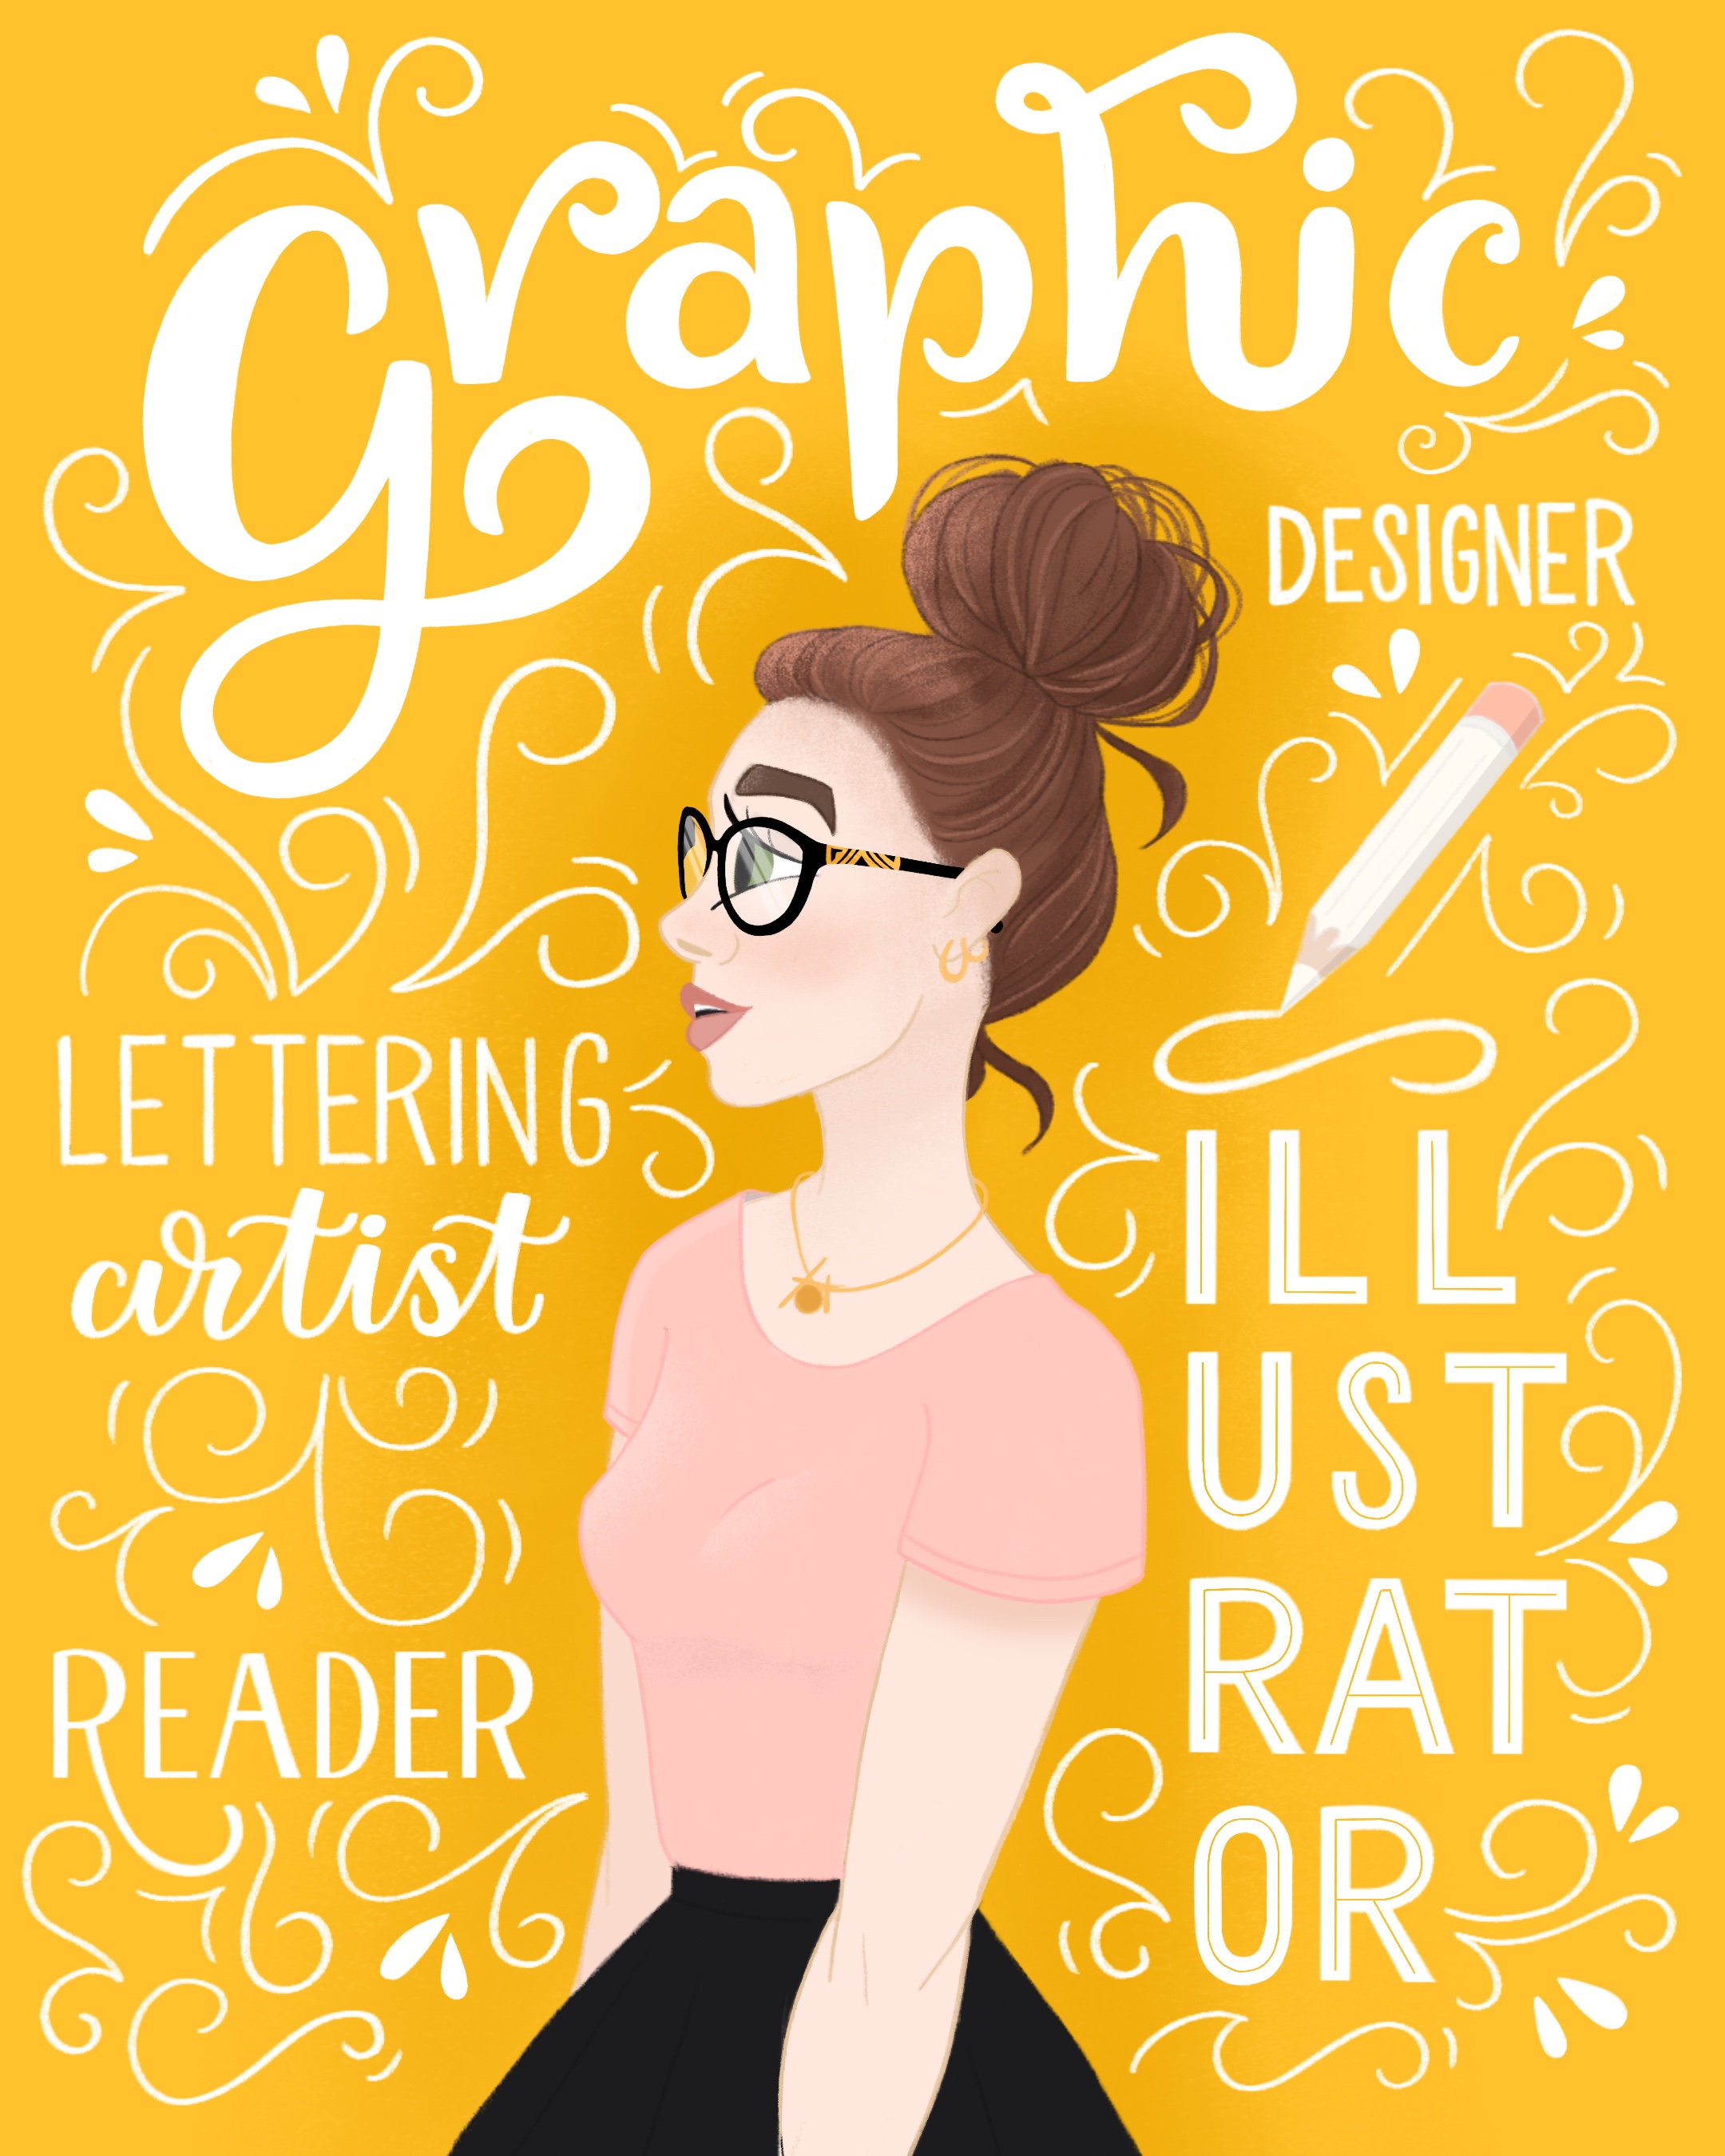 An illustration of Kristina Gorobets with lettering around her, reading 'illustrator,' 'graphic designer,' 'reader' and 'lettering artist' on a bright yellow background.